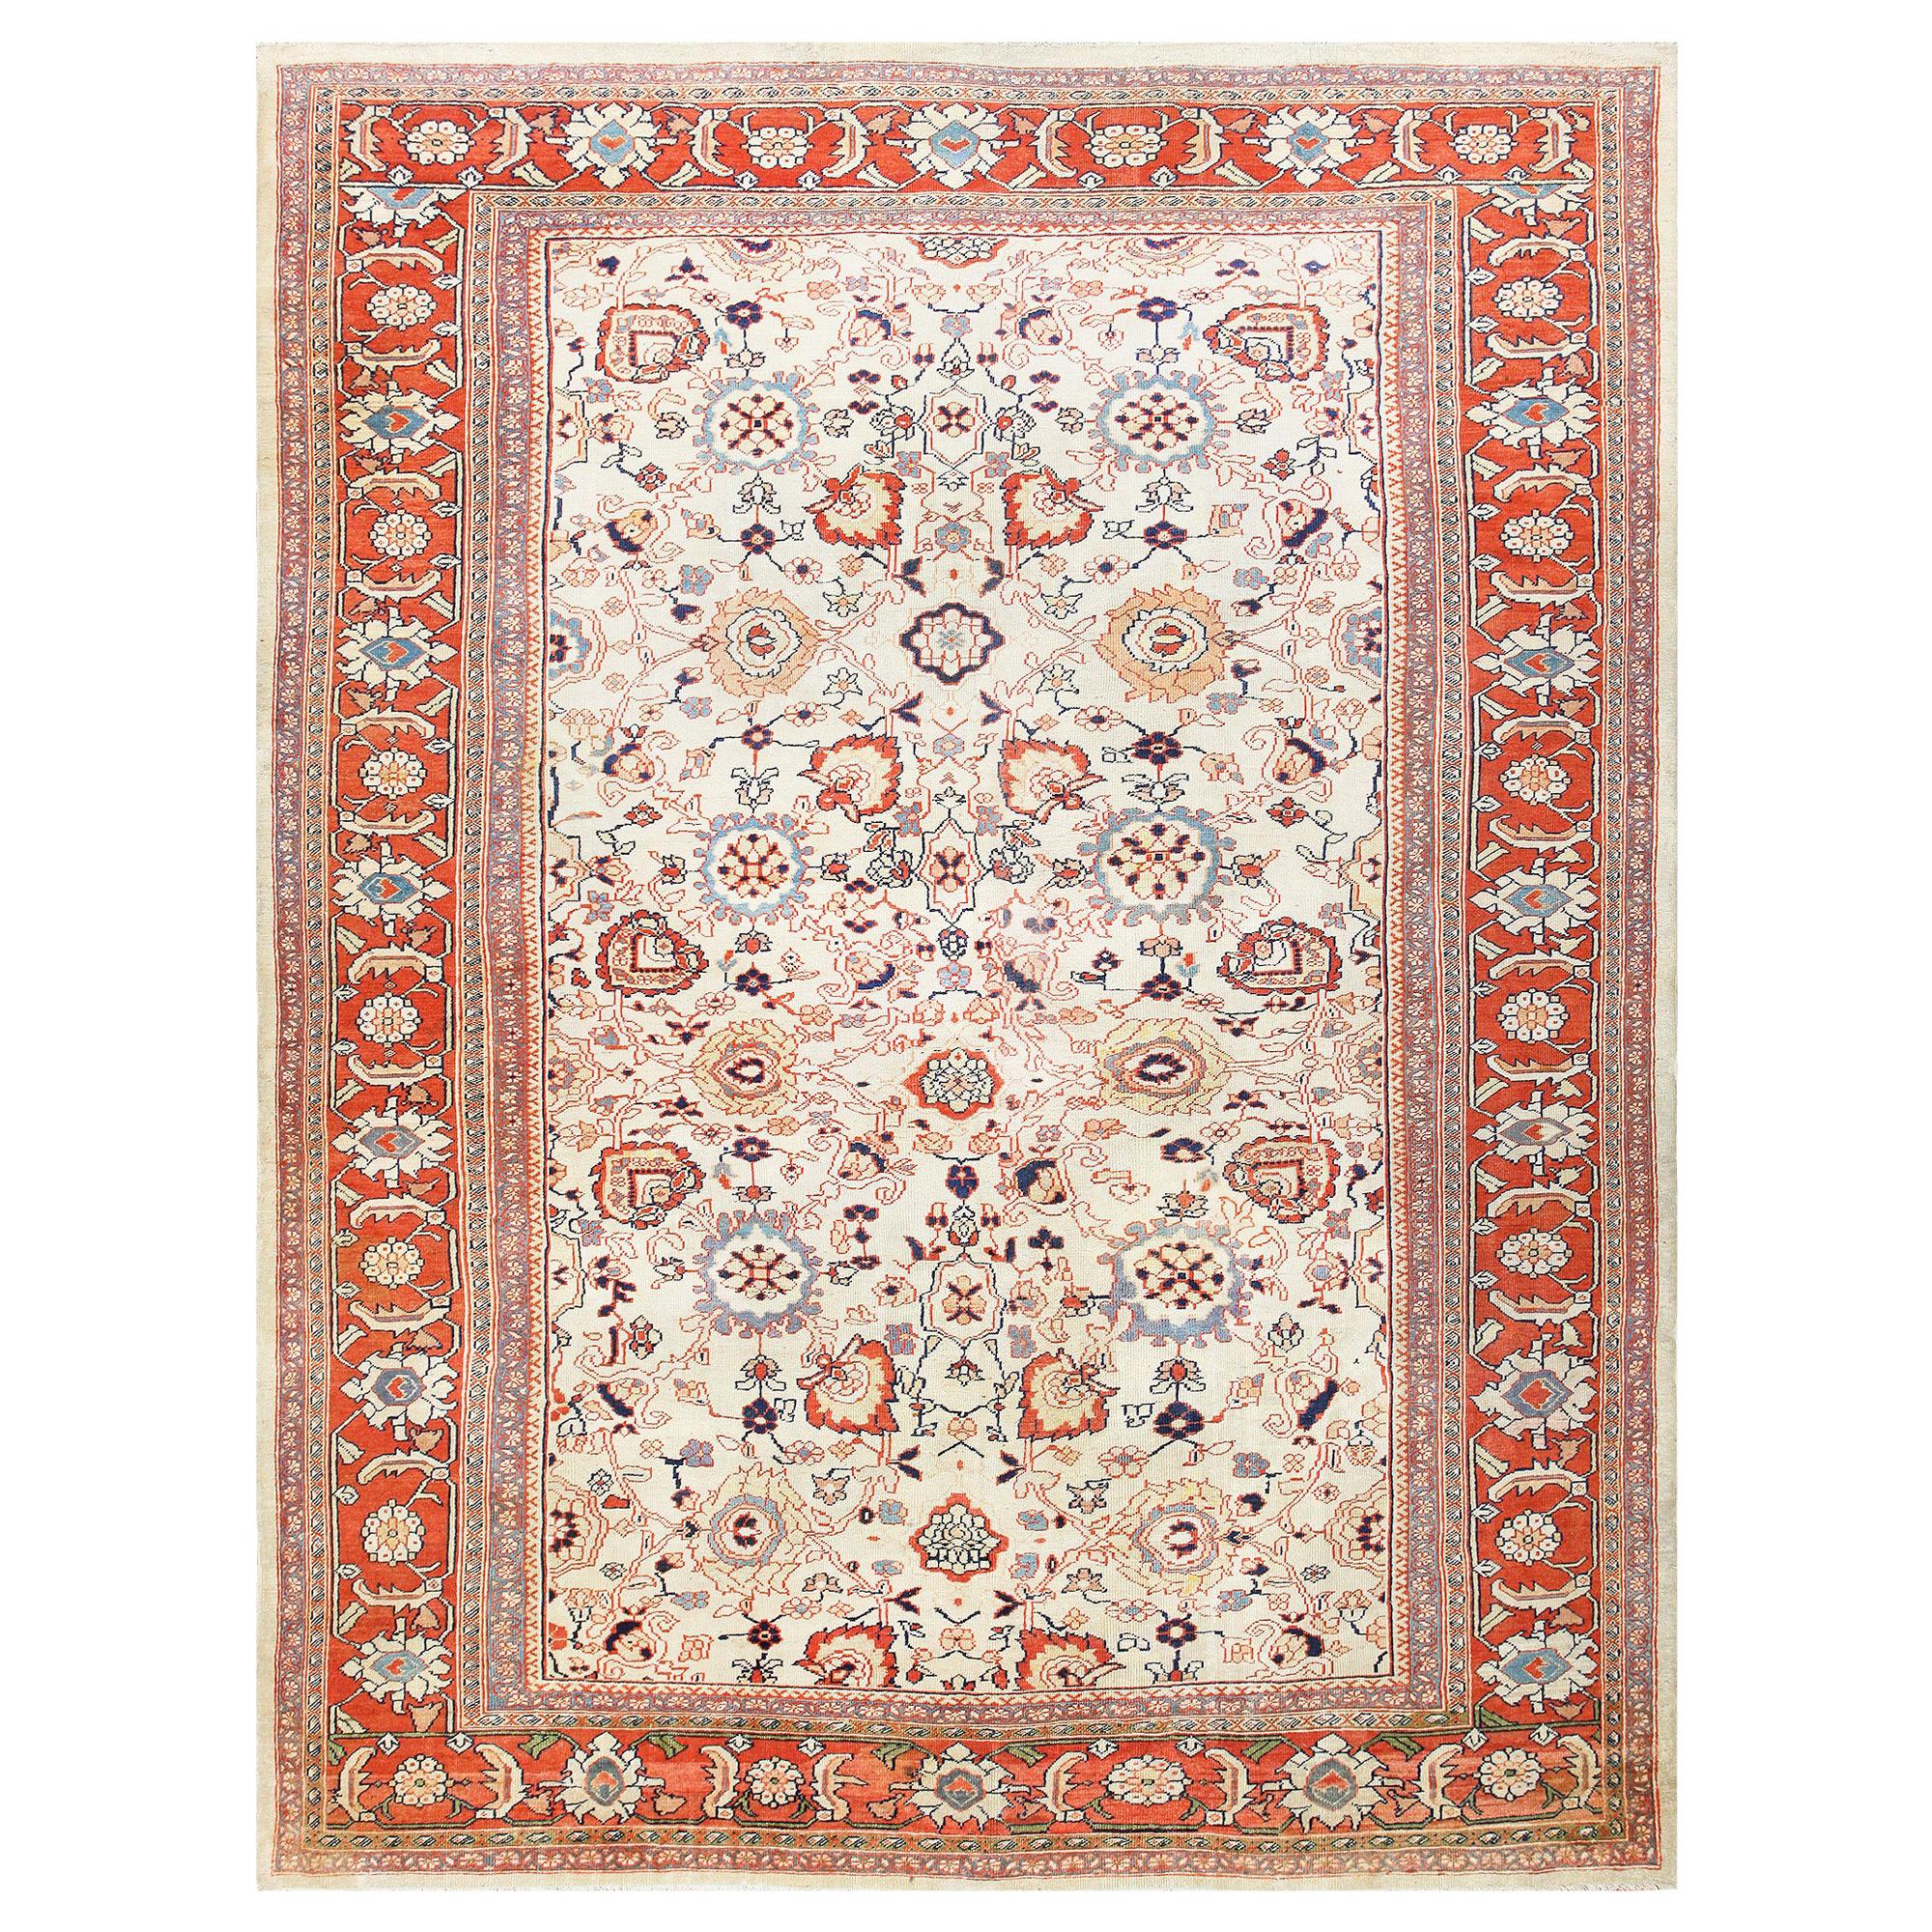 Antique Persian Sultanabad Rug. Size: 11' x 14' 4"